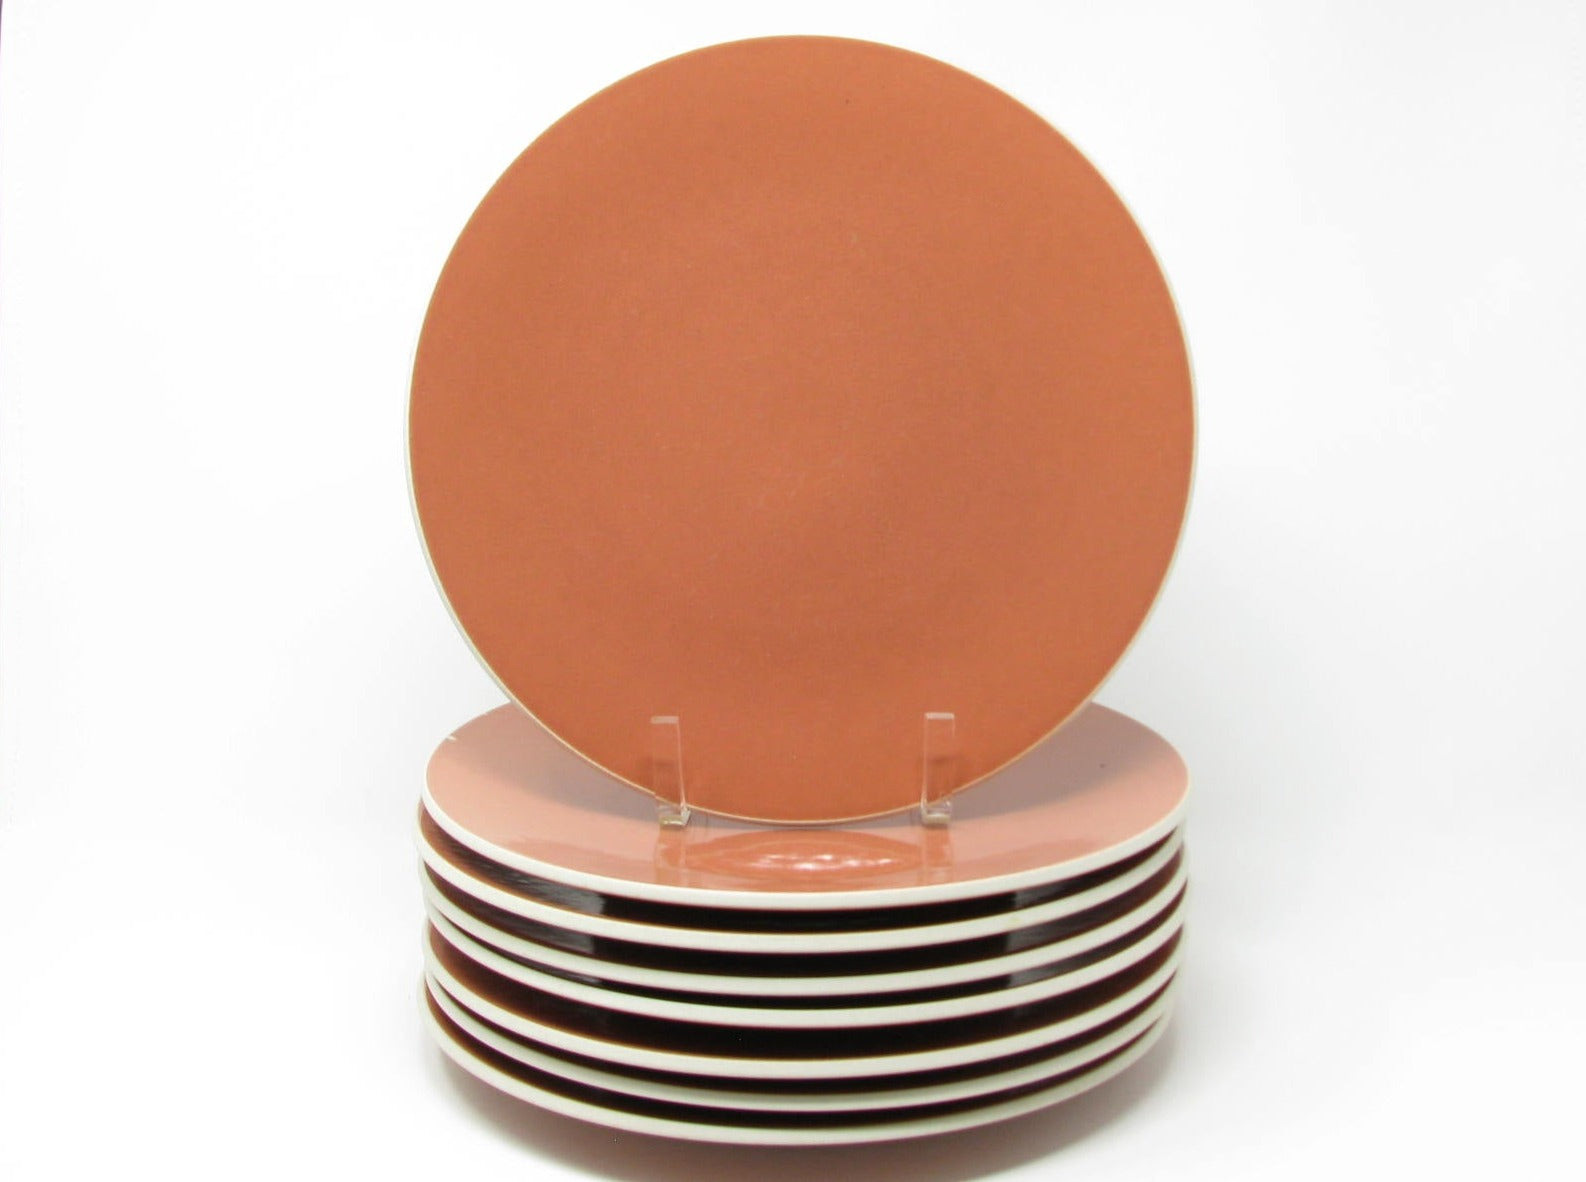 edgebrookhouse Vintage Massimo Vignelli for Sasaki Colorstone Terracotta Dinner Plates Made in Japan - 8 Pieces